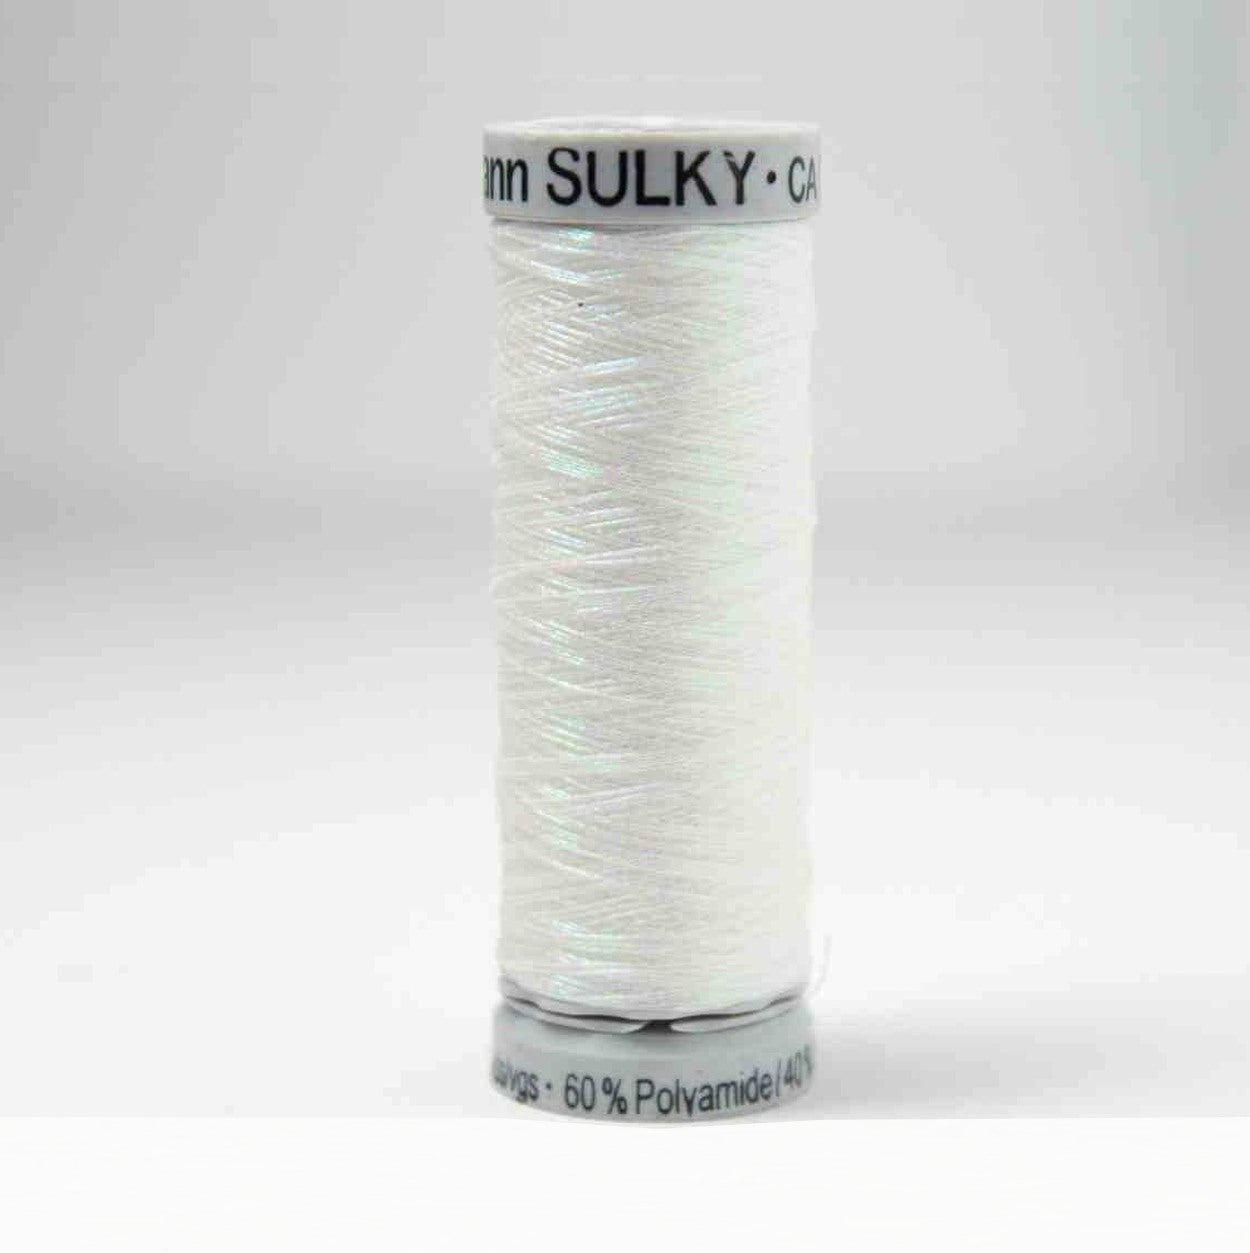 Sulky Metallic Embroidery Thread #7021 Prism White from Jaycotts Sewing Supplies